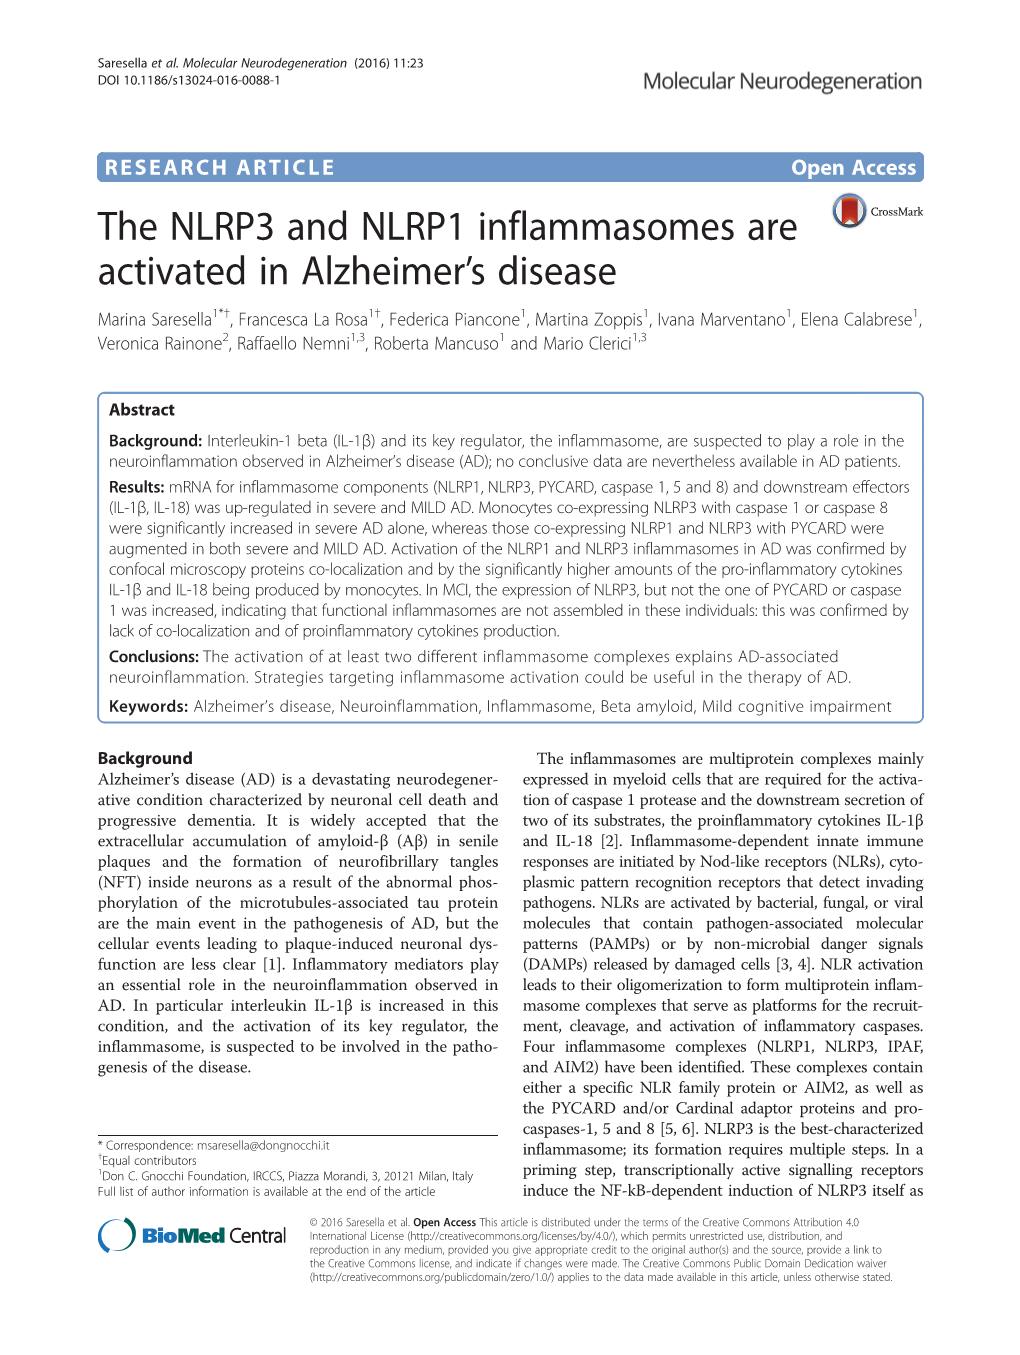 The NLRP3 and NLRP1 Inflammasomes Are Activated In